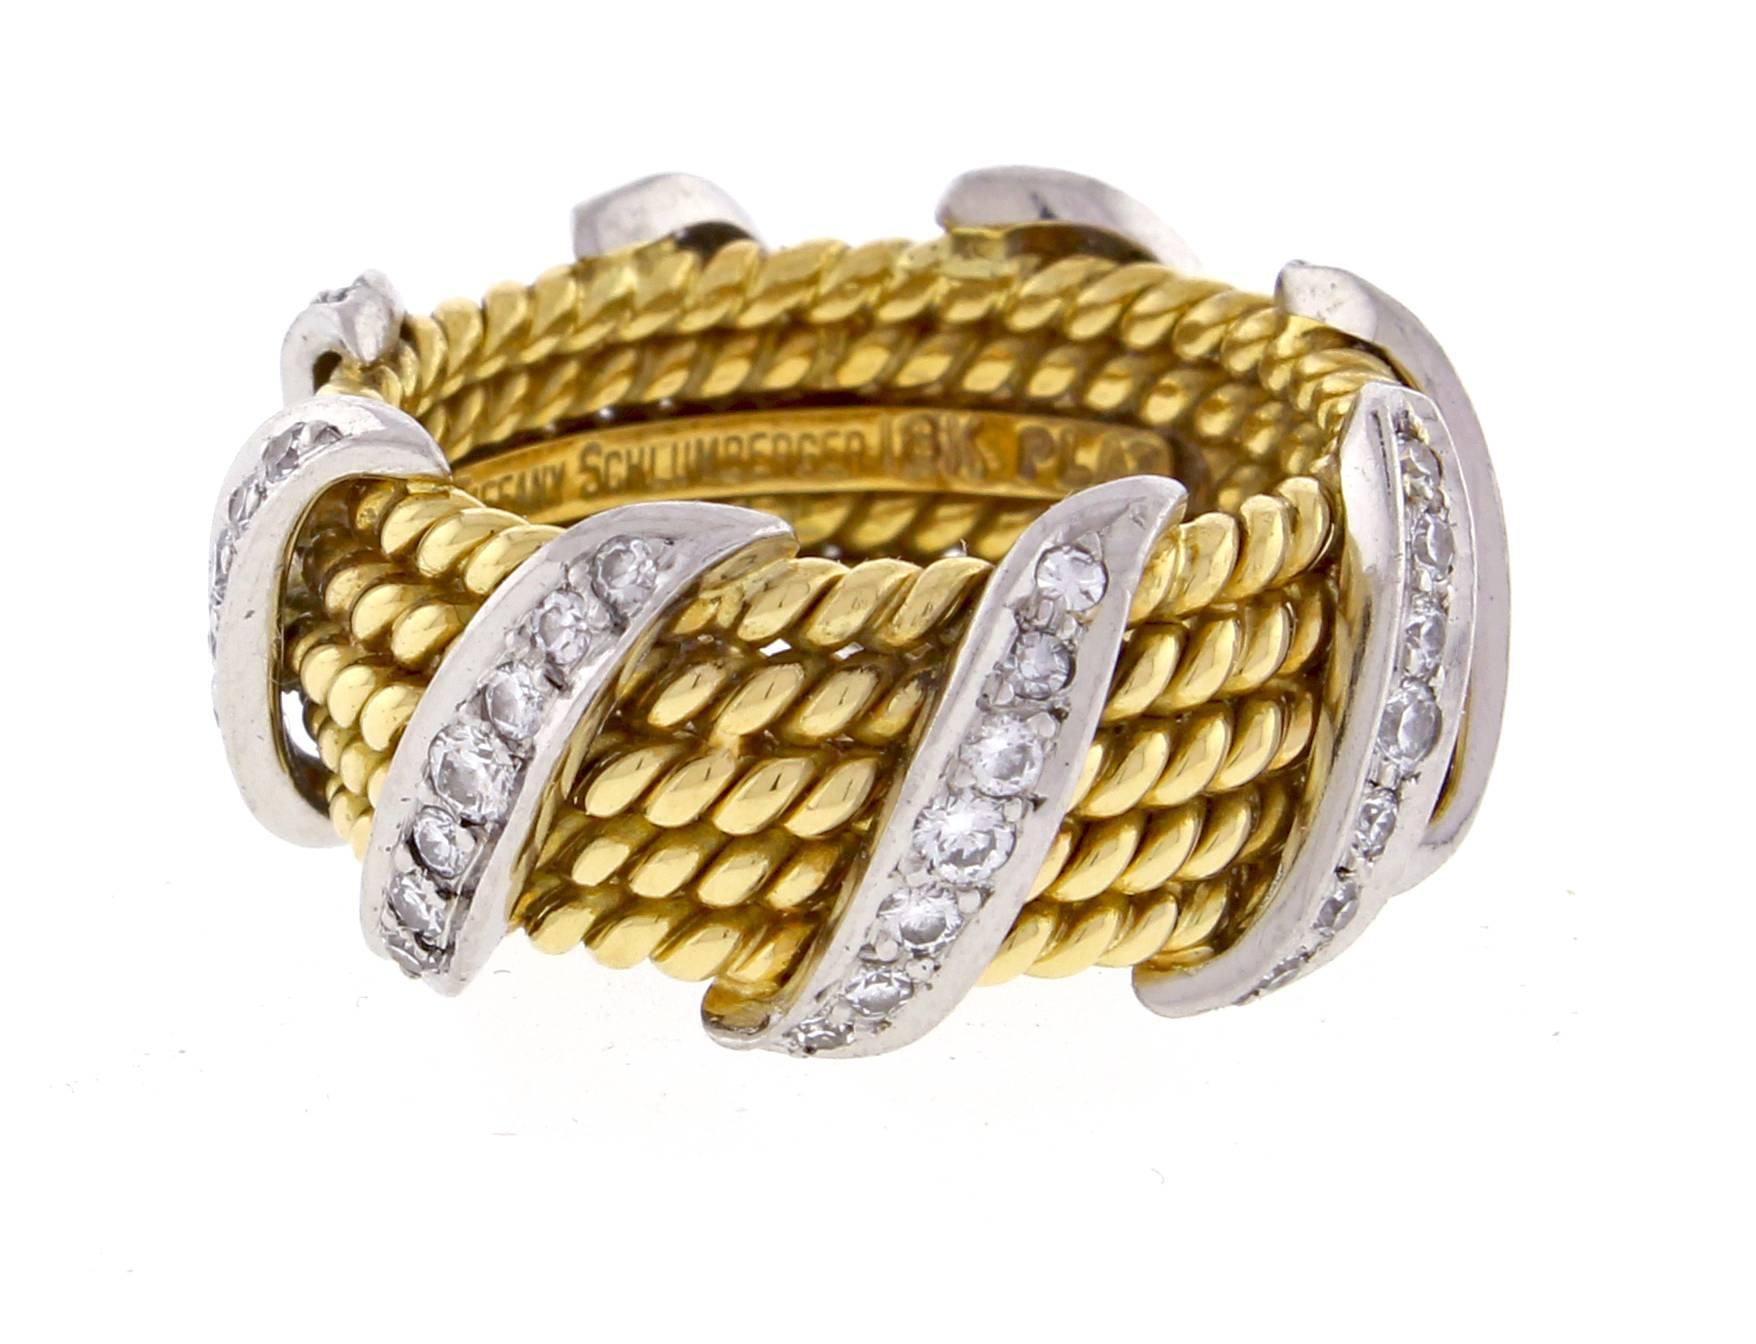  From Jean Schlumberger for Tiffany & Co. a wide band ring. Designed with five 18 karat yellow gold twisted ropes and accented by brilliant diamonds set in a diagonal wrap bands in platinum, signed Schlumberger for Tiffany & Co. 56 diamonds weighing